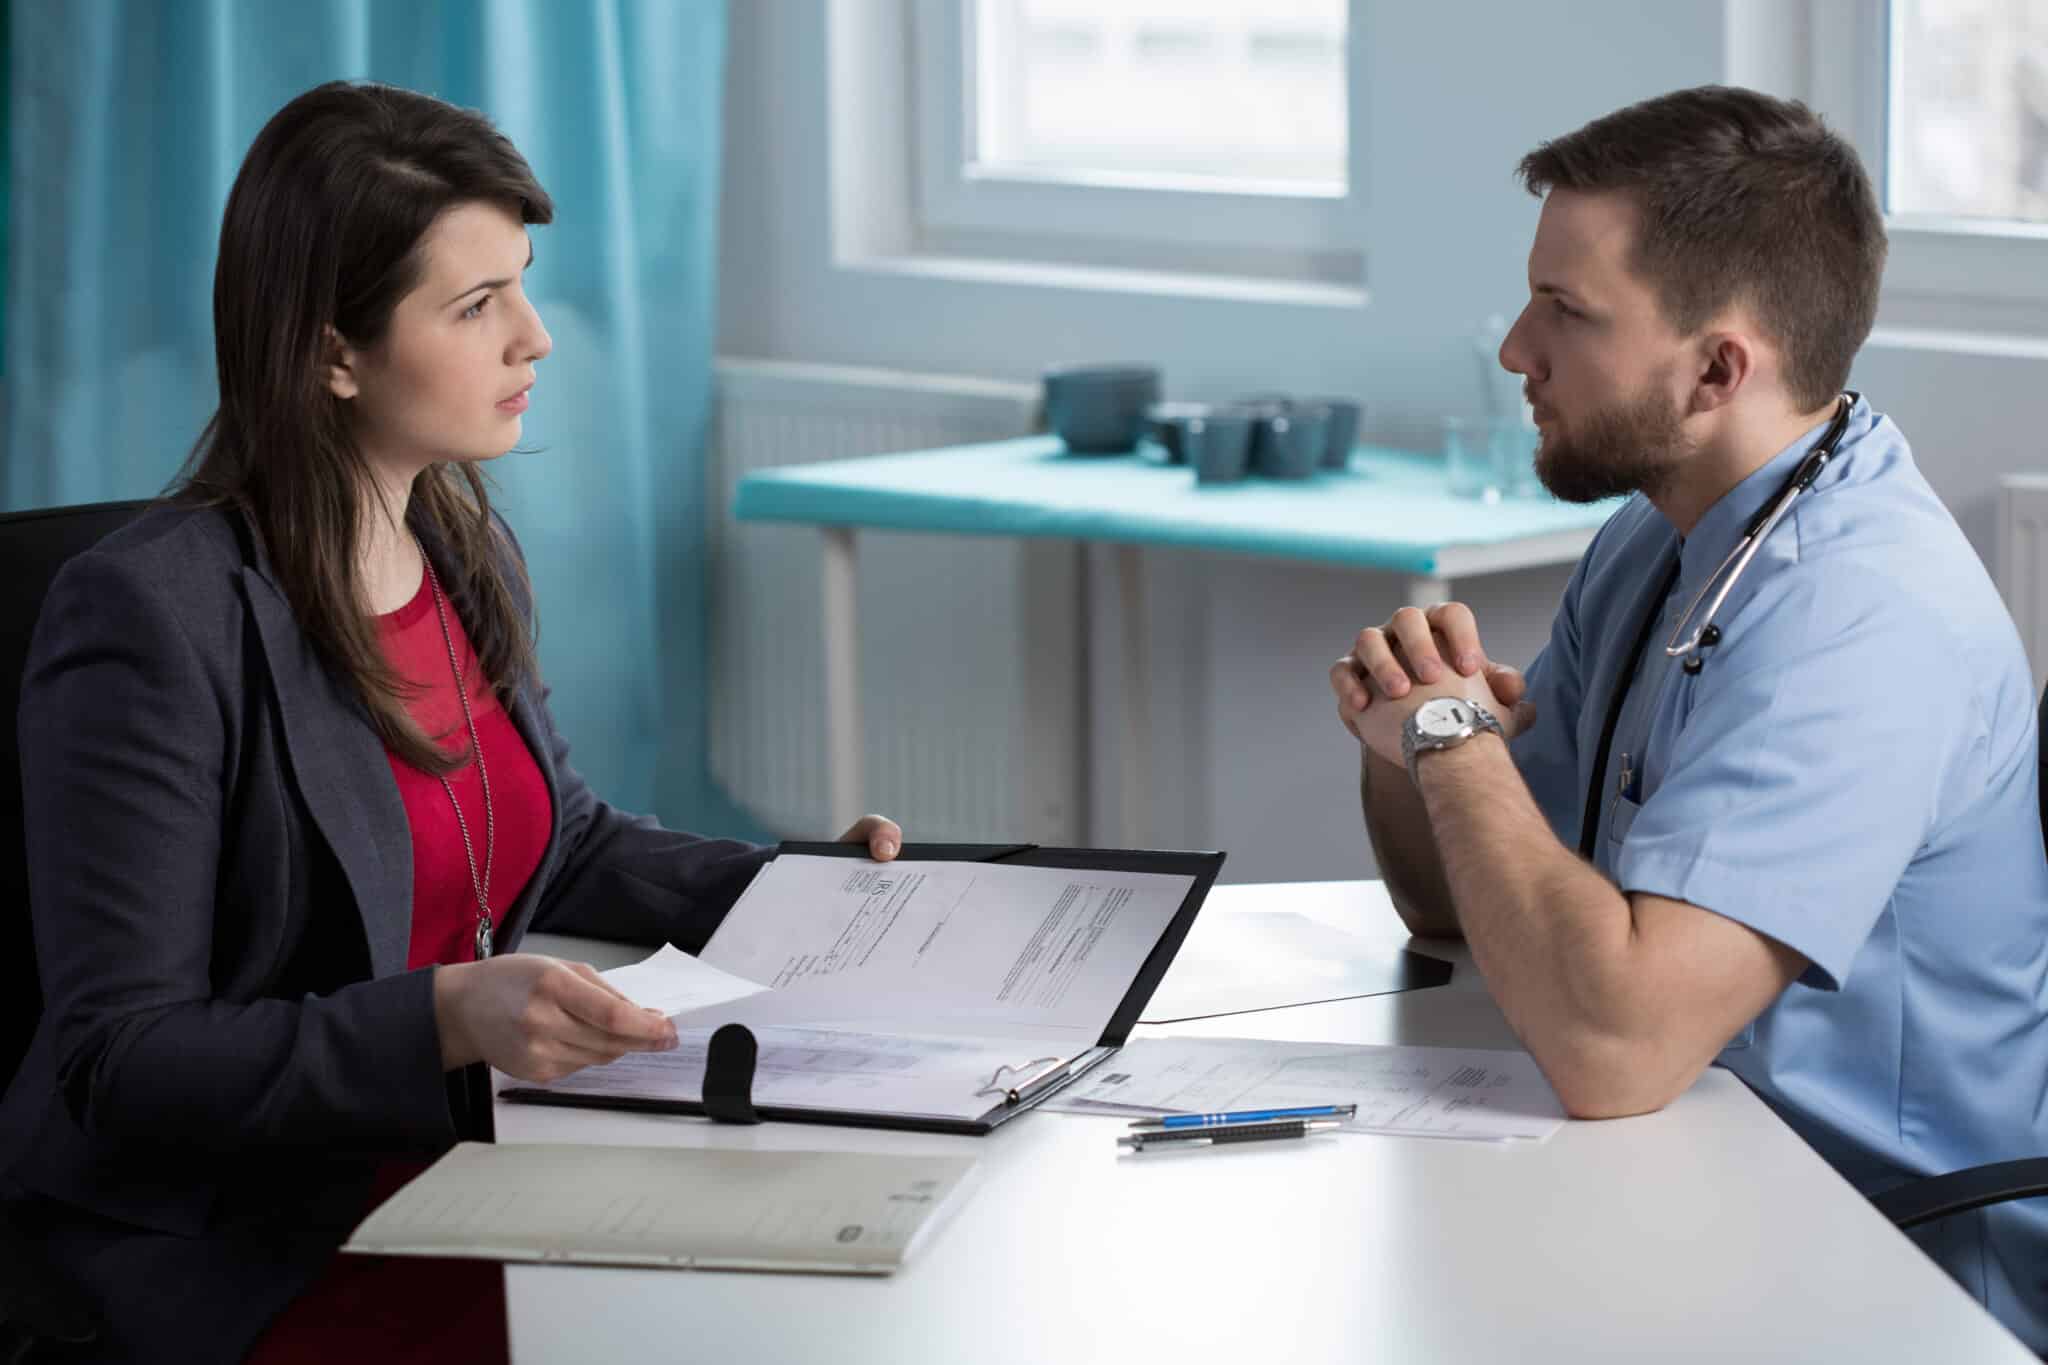 Lawyer and doctor in serious meeting discuss a malpractice claim related to medical record errors.